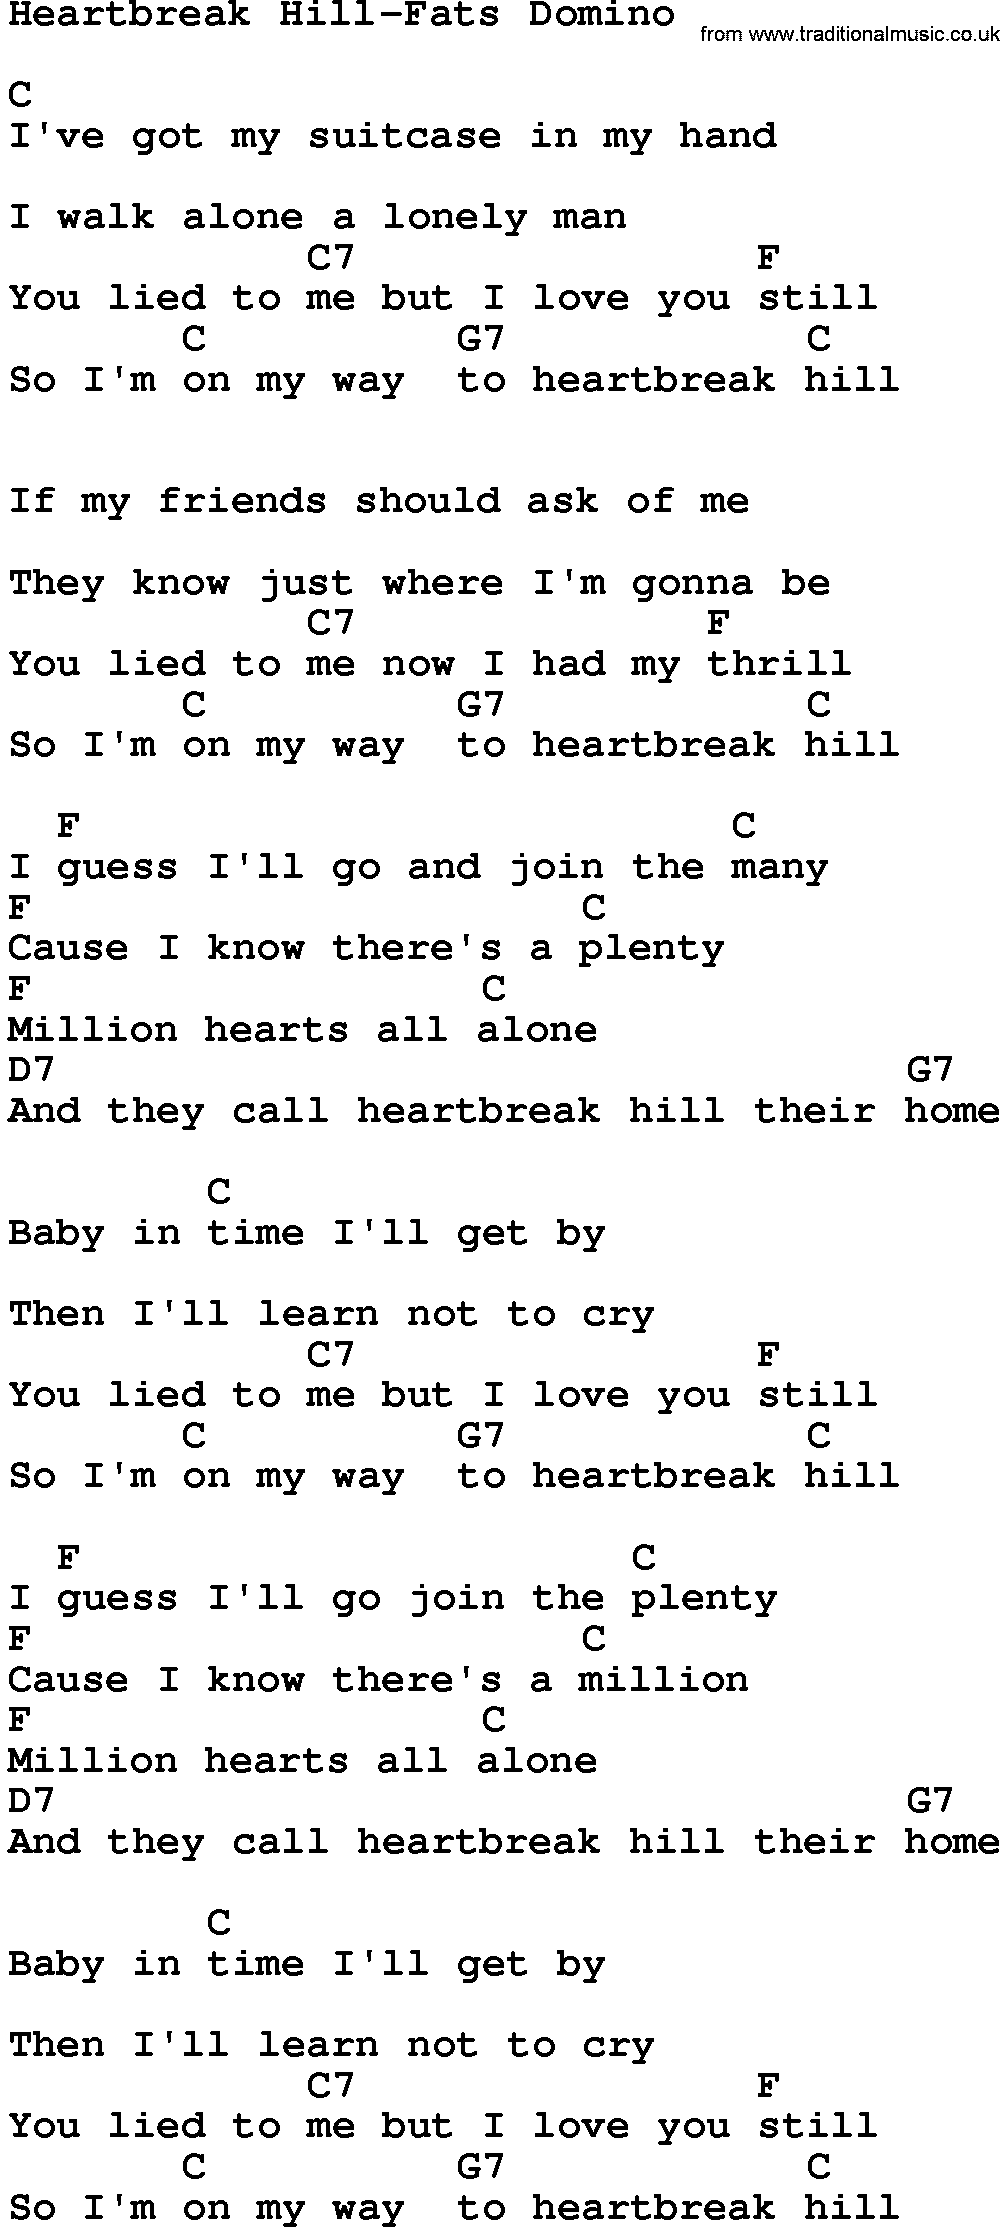 Country music song: Heartbreak Hill-Fats Domino lyrics and chords